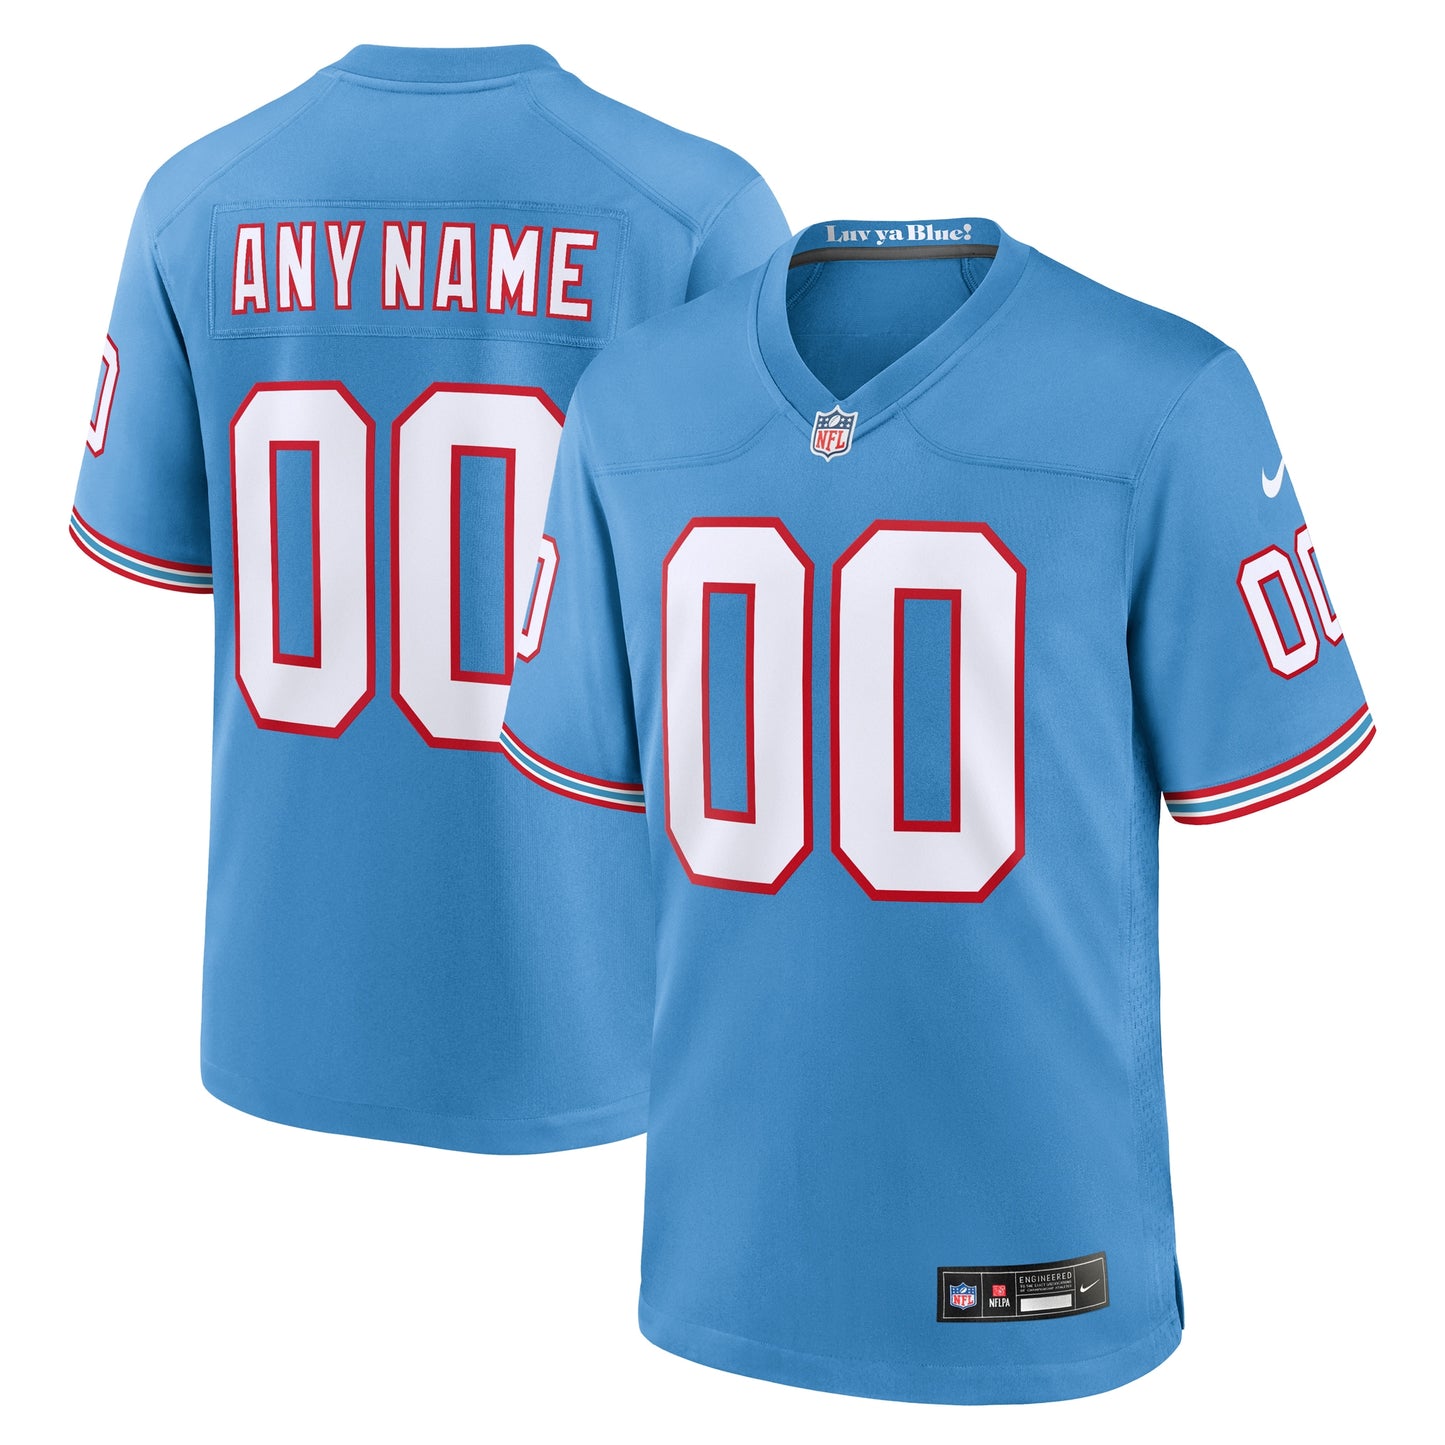 Tennessee Titans Nike Oilers Throwback Custom Game Jersey - Light Blue